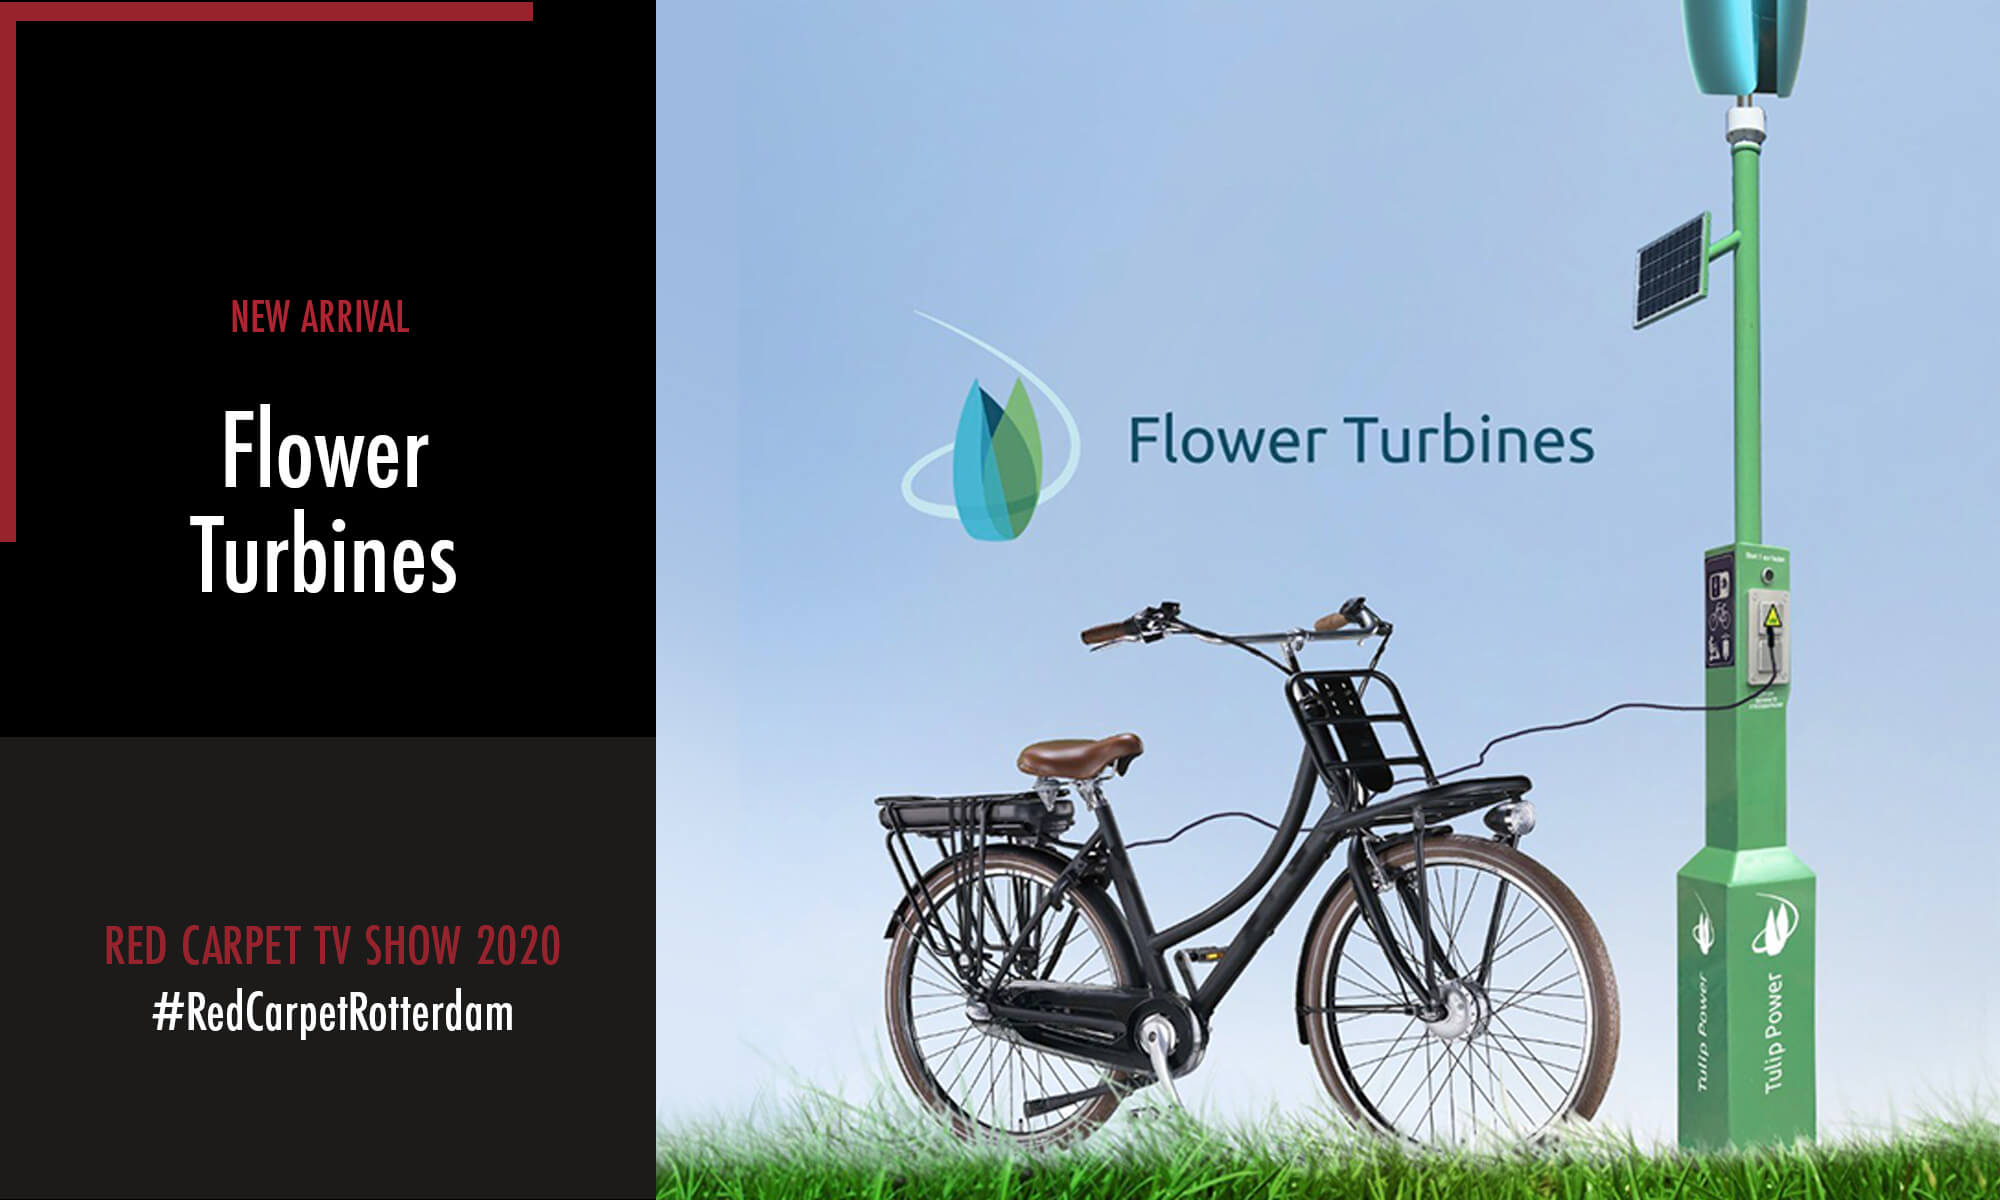 Flower Turbines is one of the new arrivals participating in the Red Carpet TV Show 2020